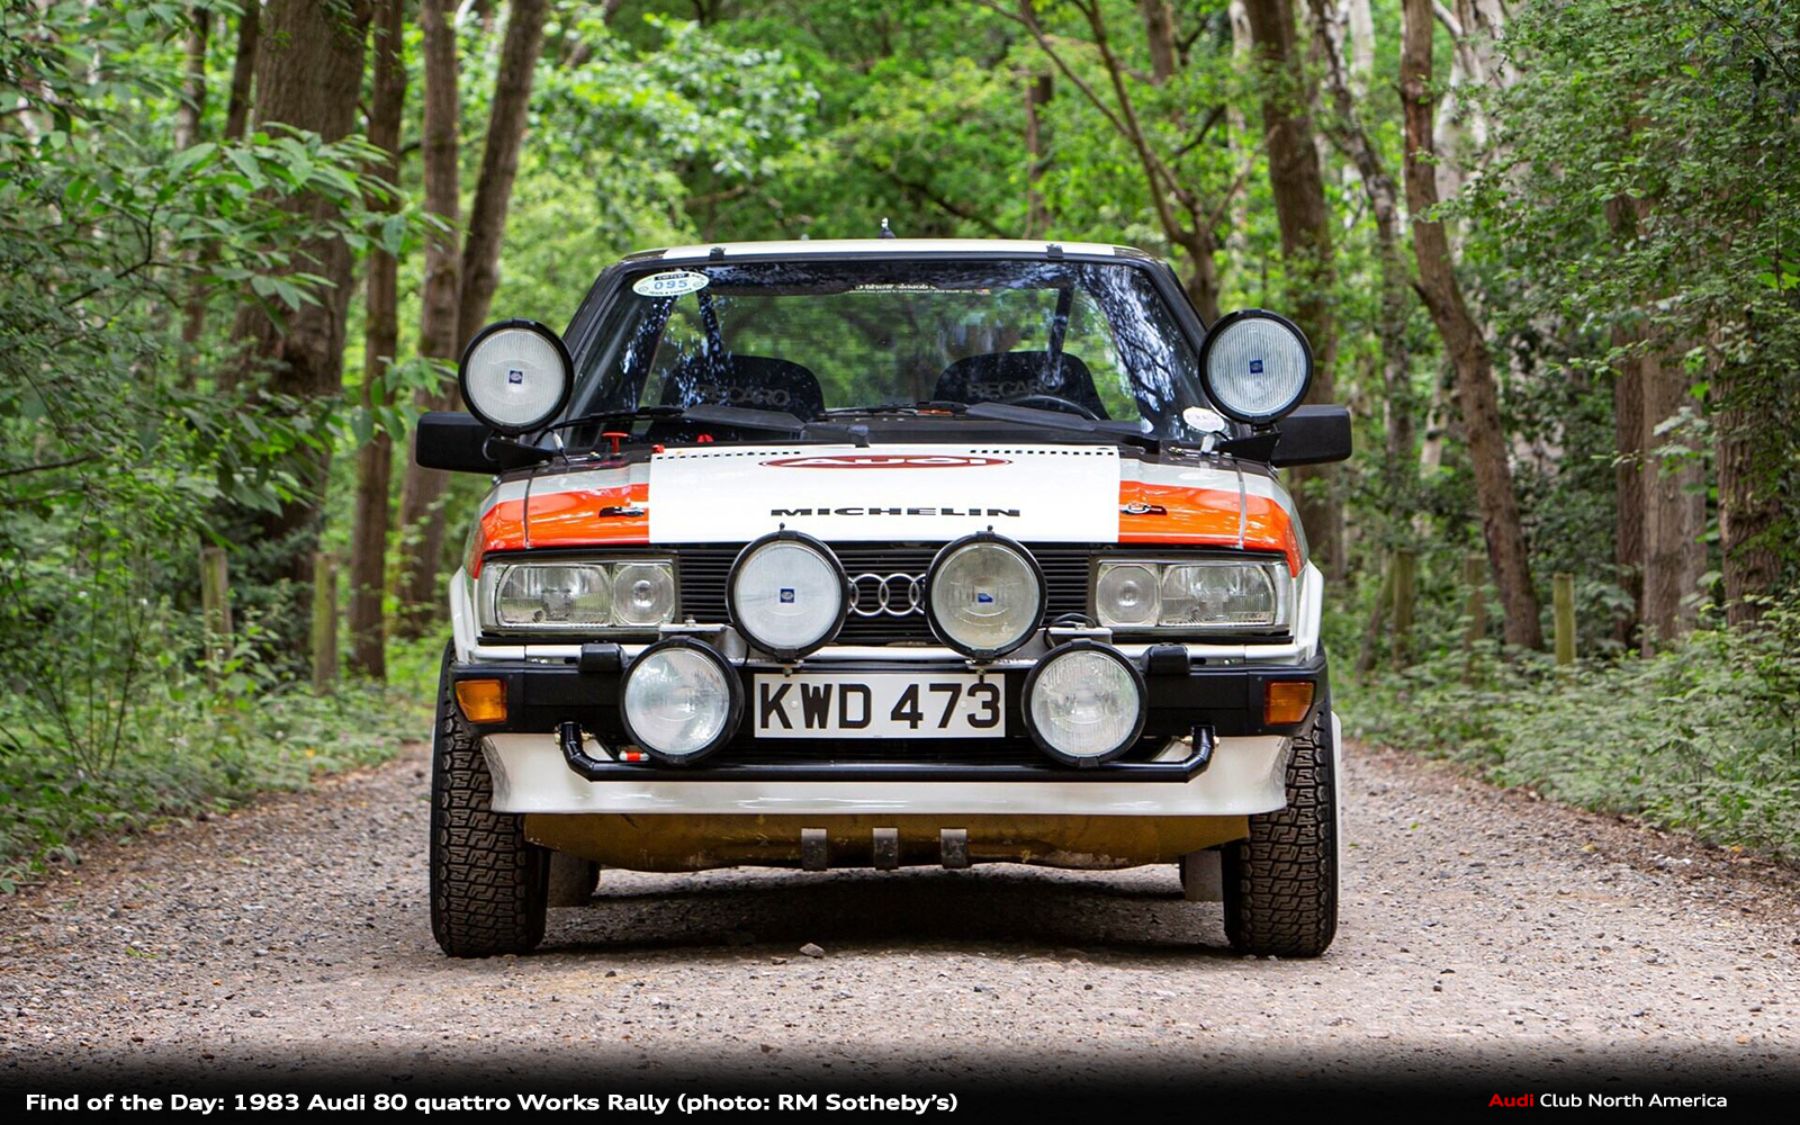 Find of the Day: 1983 Audi 80 quattro Works Rally - Audi Club North America